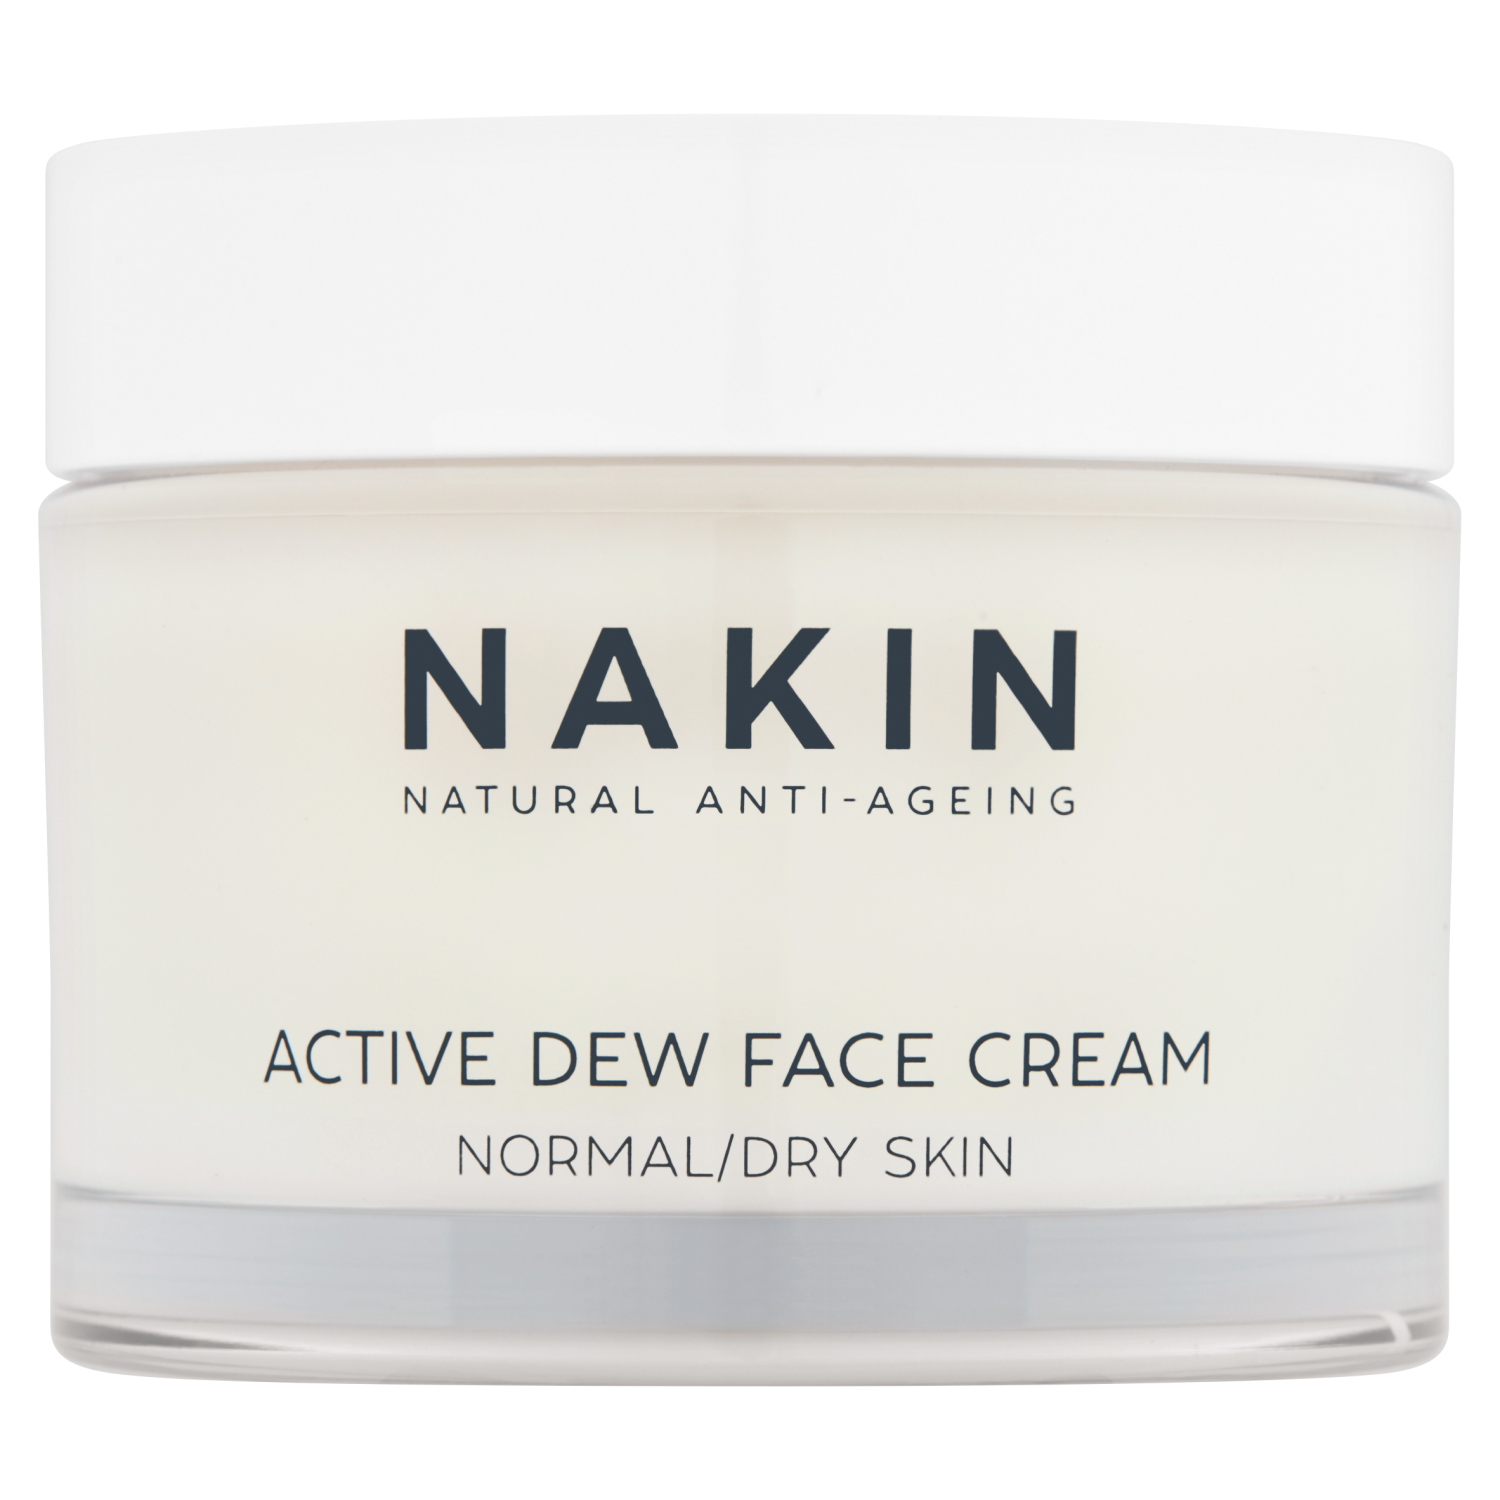 Image of Nakin Natural Anti-Ageing Active Dew Face Cream